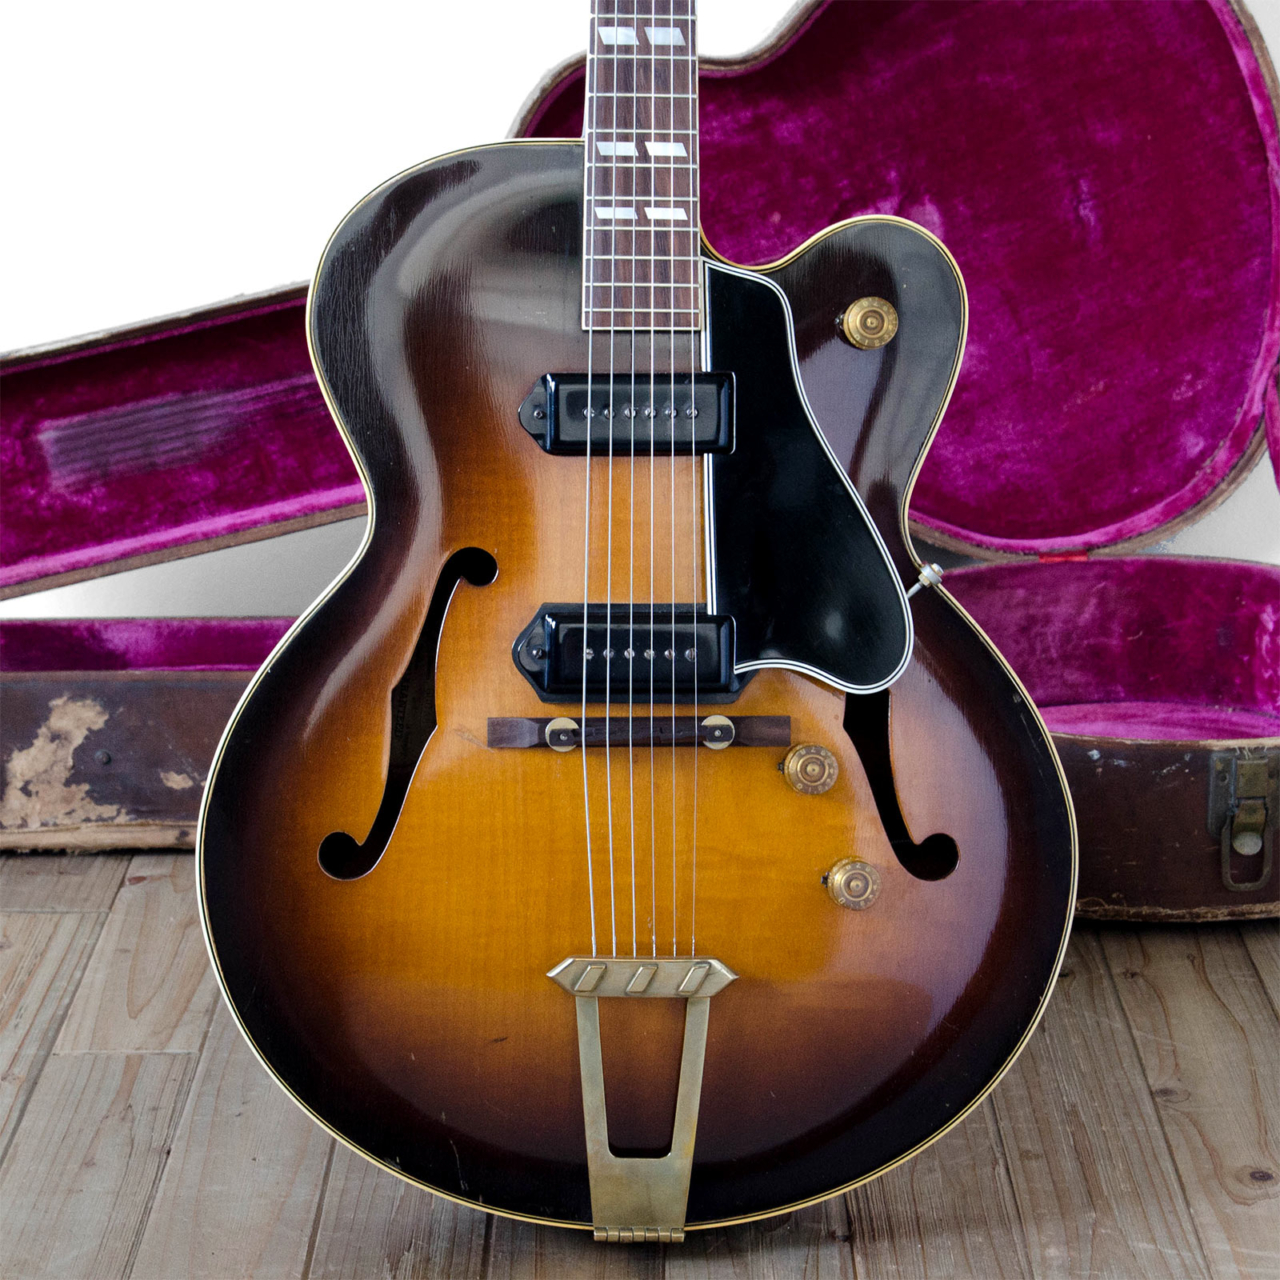 Hollowbody Archtop Gibson ES-350